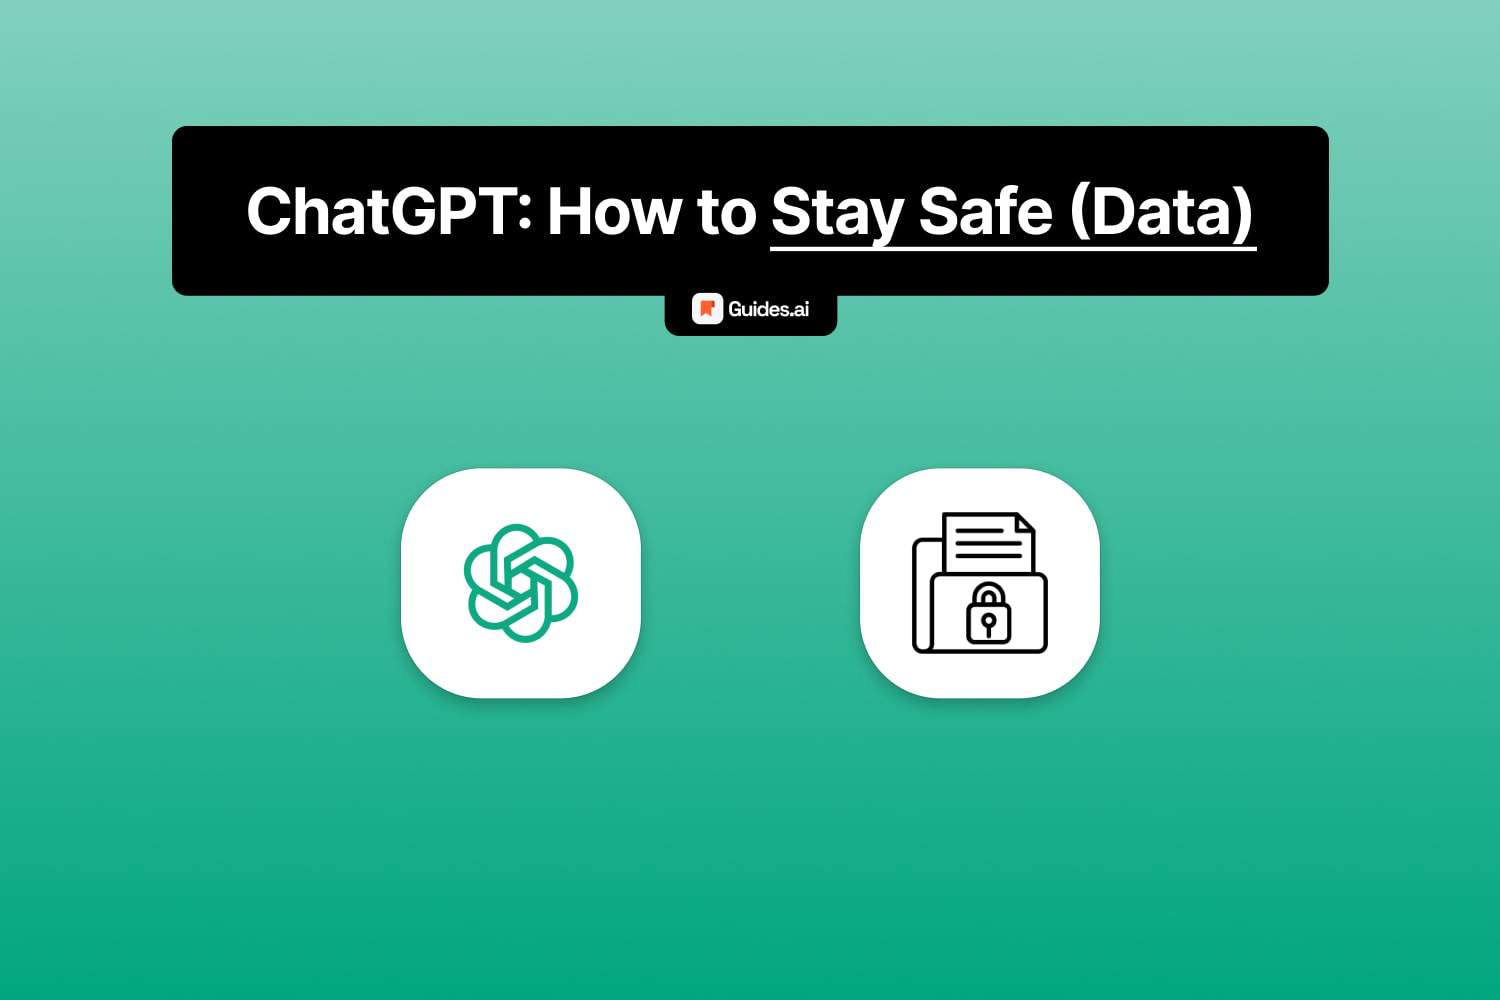 How to stay safe using ChatGPT